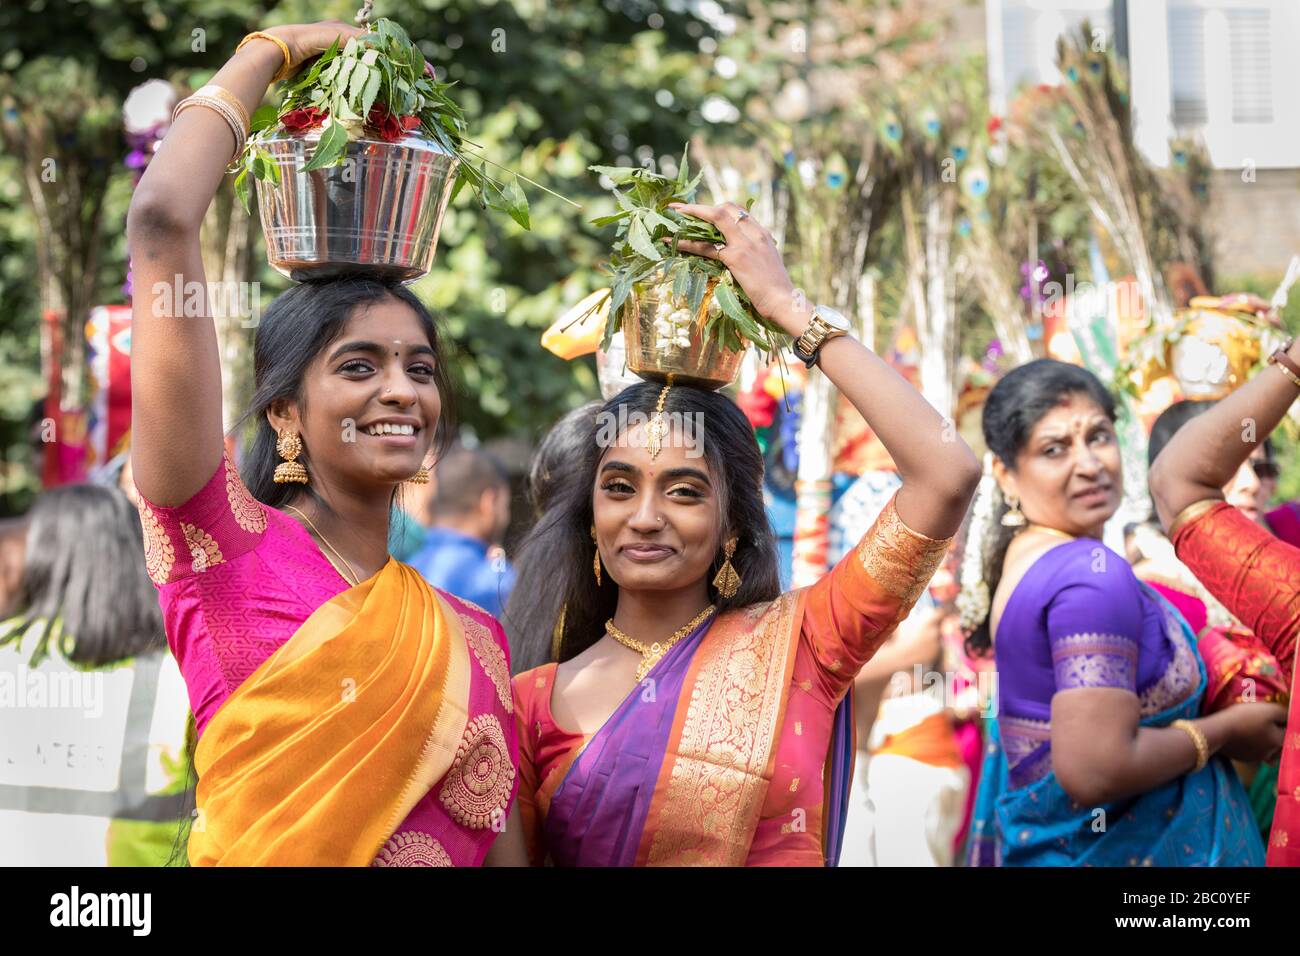 Young Hindu  women in sari, smiling as they participate in a  Chariot Festival procession, carrying offering on her head Stock Photo